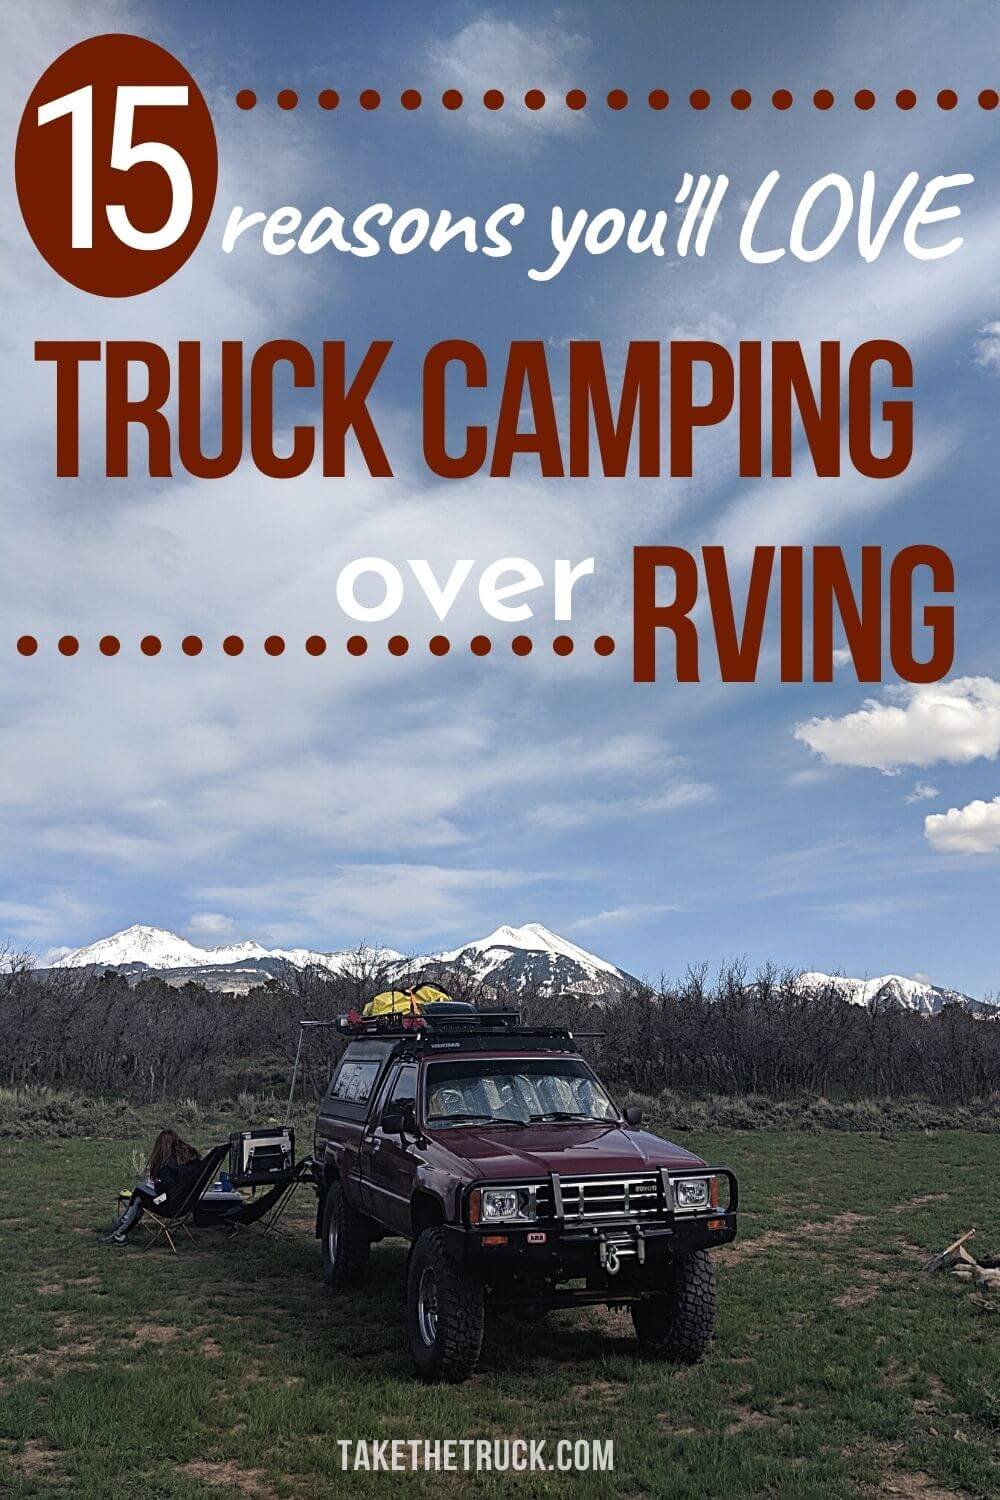 Trying to figure out RV vs camper? Here’s a list of 15 reasons truck shell camping and truck camper traveling win out over RV travel. It will help with the decision of truck bed camper vs rv.